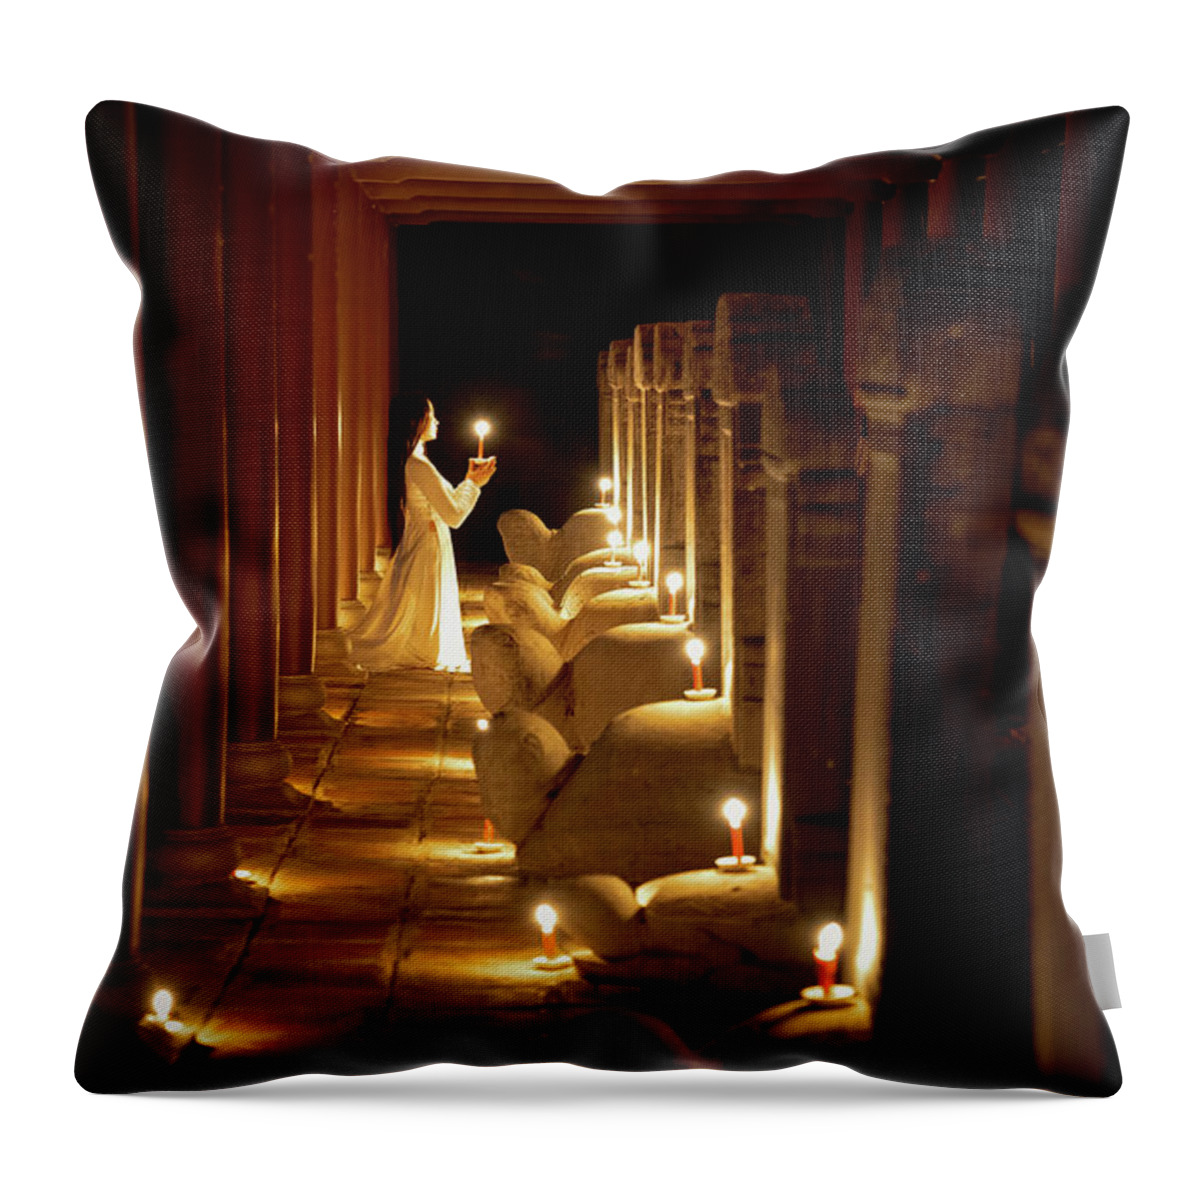 People Throw Pillow featuring the photograph Pray for souls by Khanh Bui Phu